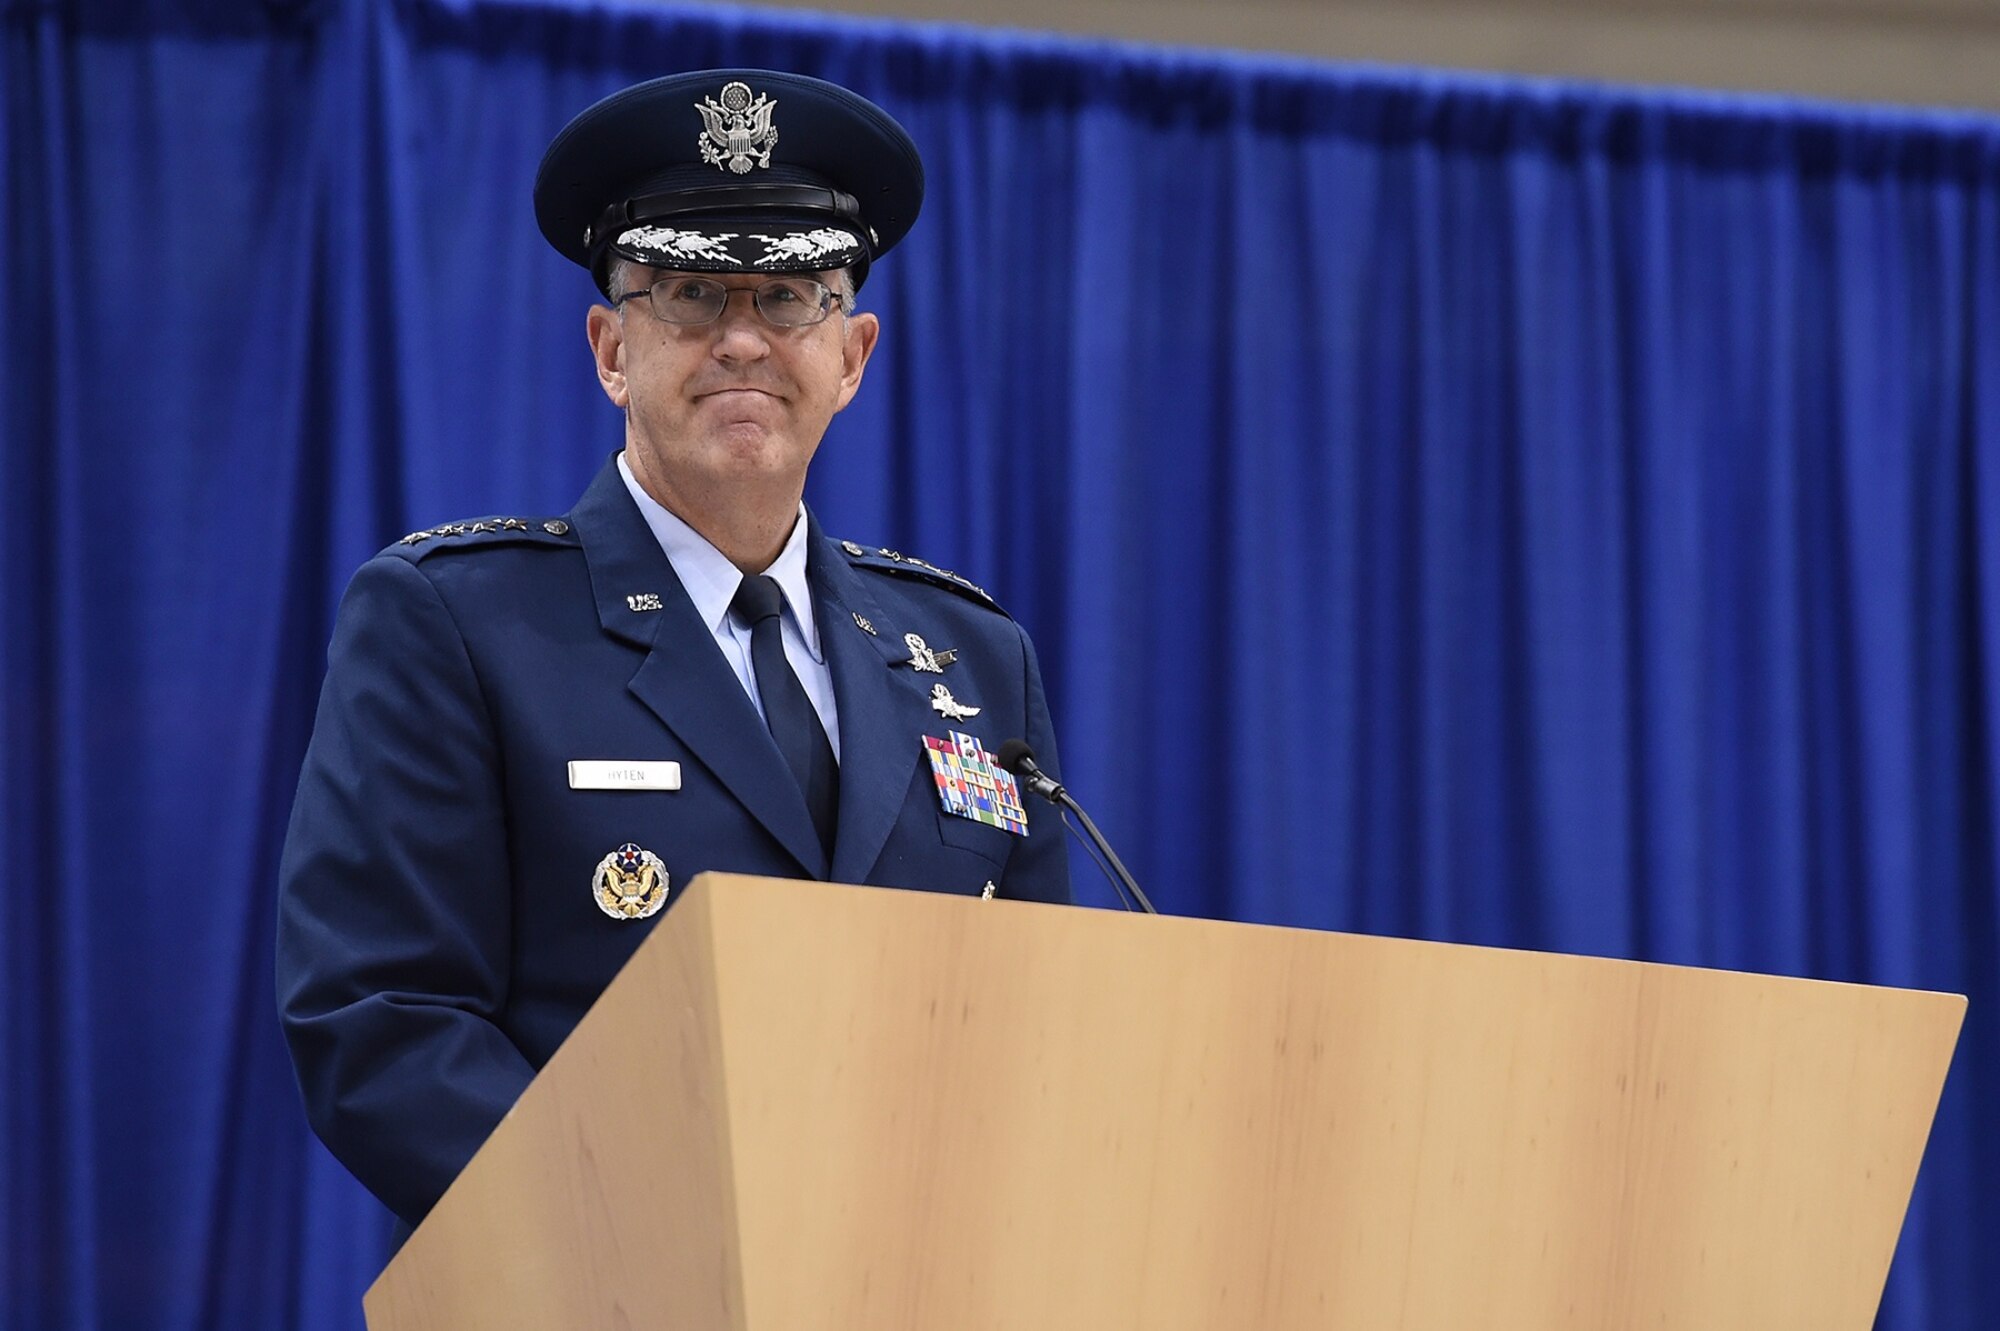 Gen. John E. Hyten, commander of U.S. Strategic Command (USSTRATCOM) provided remarks during the change of command ceremony at Offutt Air Force Base, Neb., Nov. 3, 2016. Secretary of Defense Ash Carter presided over the change of command and provided remarks during which he congratulated Hyten on his appointment as the new USSTRATCOM commander. He also thanked Adm. Cecil D. Haney, outgoing USSTRATCOM commander, for his service. Additionally, Chairman of the Joint Chiefs of Staff Gen. Joseph F. Dunford provided remarks during the ceremony and presented the Joint Meritorious Unit Award to USSTRATCOM. Hyten previously served as commander of Air Force Space Command, and Haney will retire from active military duty during a separate ceremony in January. One of nine DoD unified combatant commands, USSTRATCOM has global strategic missions assigned through the Unified Command Plan that include strategic deterrence; space operations; cyberspace operations; joint electronic warfare; global strike; missile defense; intelligence, surveillance and reconnaissance; combating weapons of mass destruction; and analysis and targeting. (U.S. Air Force photo by Staff Sgt. Jonathan Lovelady)